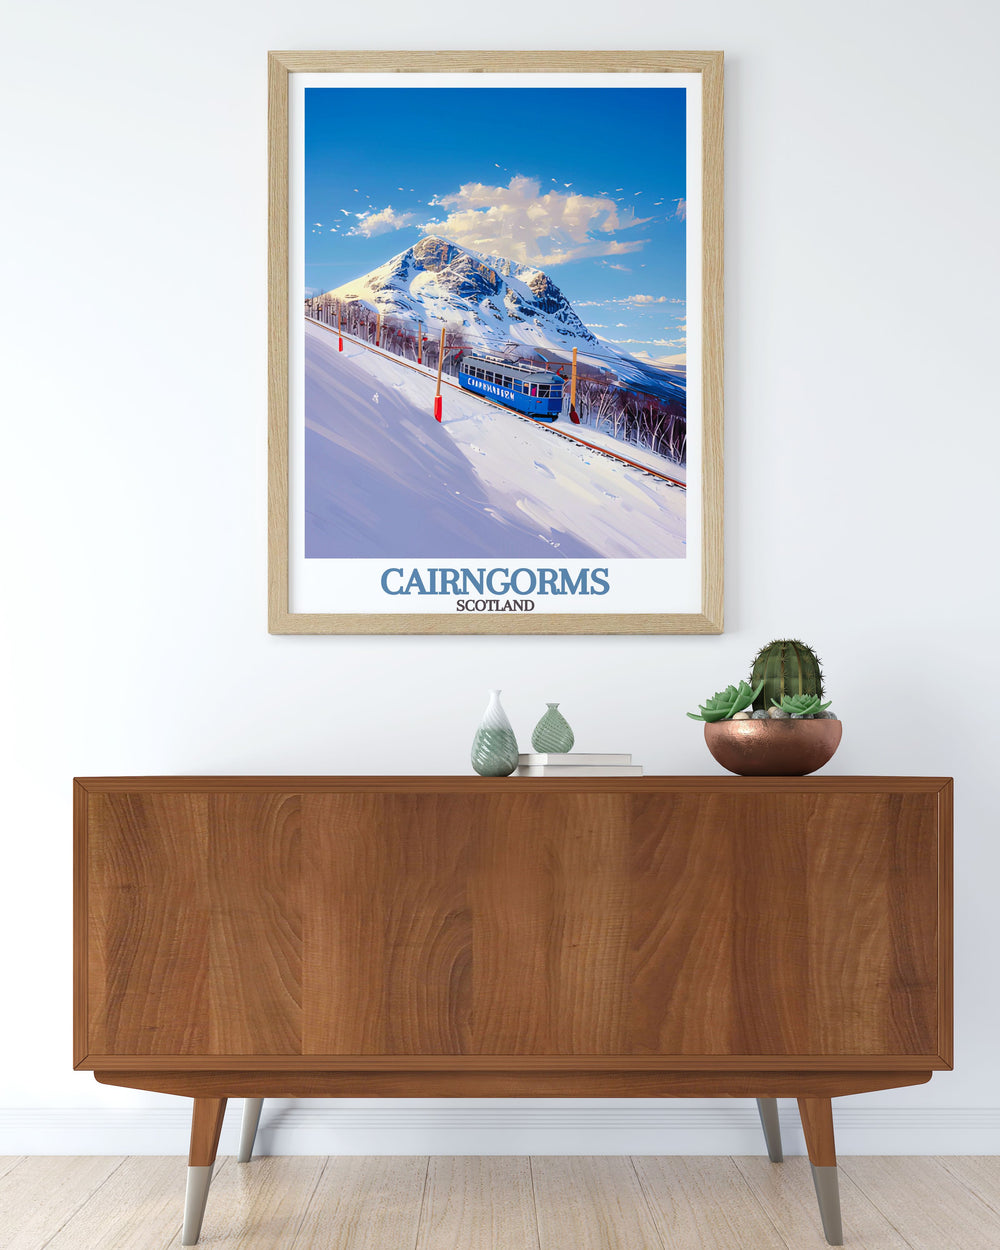 Cairngorm Mountain wall art capturing the serene beauty of the Cairngorms perfect for nature lovers and outdoor enthusiasts adds a touch of the Scottish Highlands to your living space high quality print ensures longevity and vibrant colors in your home decor.